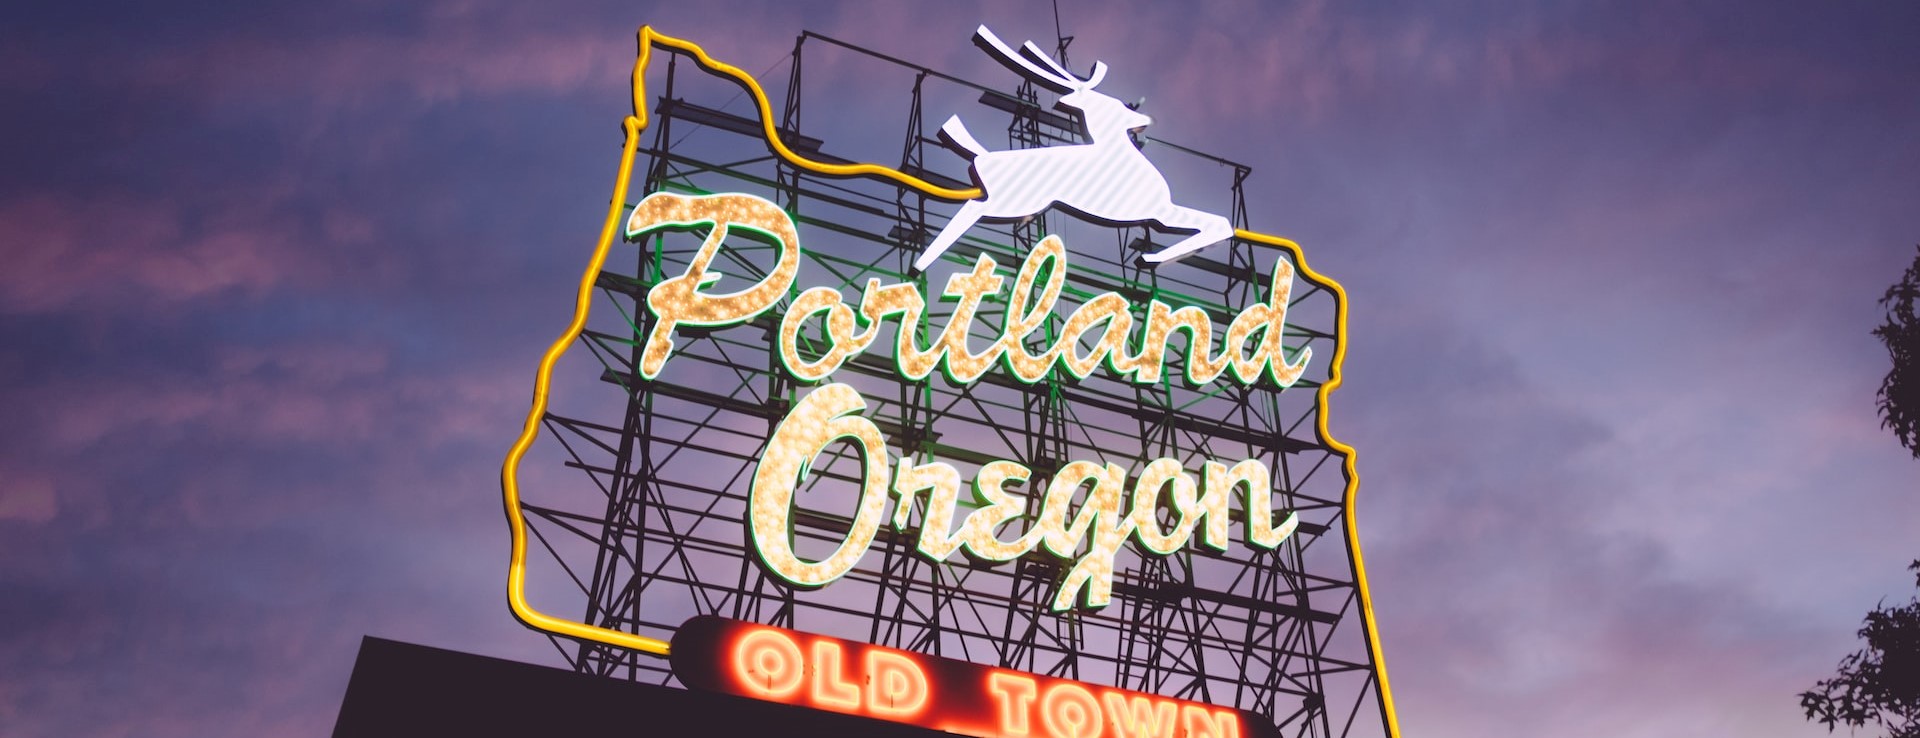 Portland Oregon Old Town neon signage during night time photo | Breast Cancer Car Donations